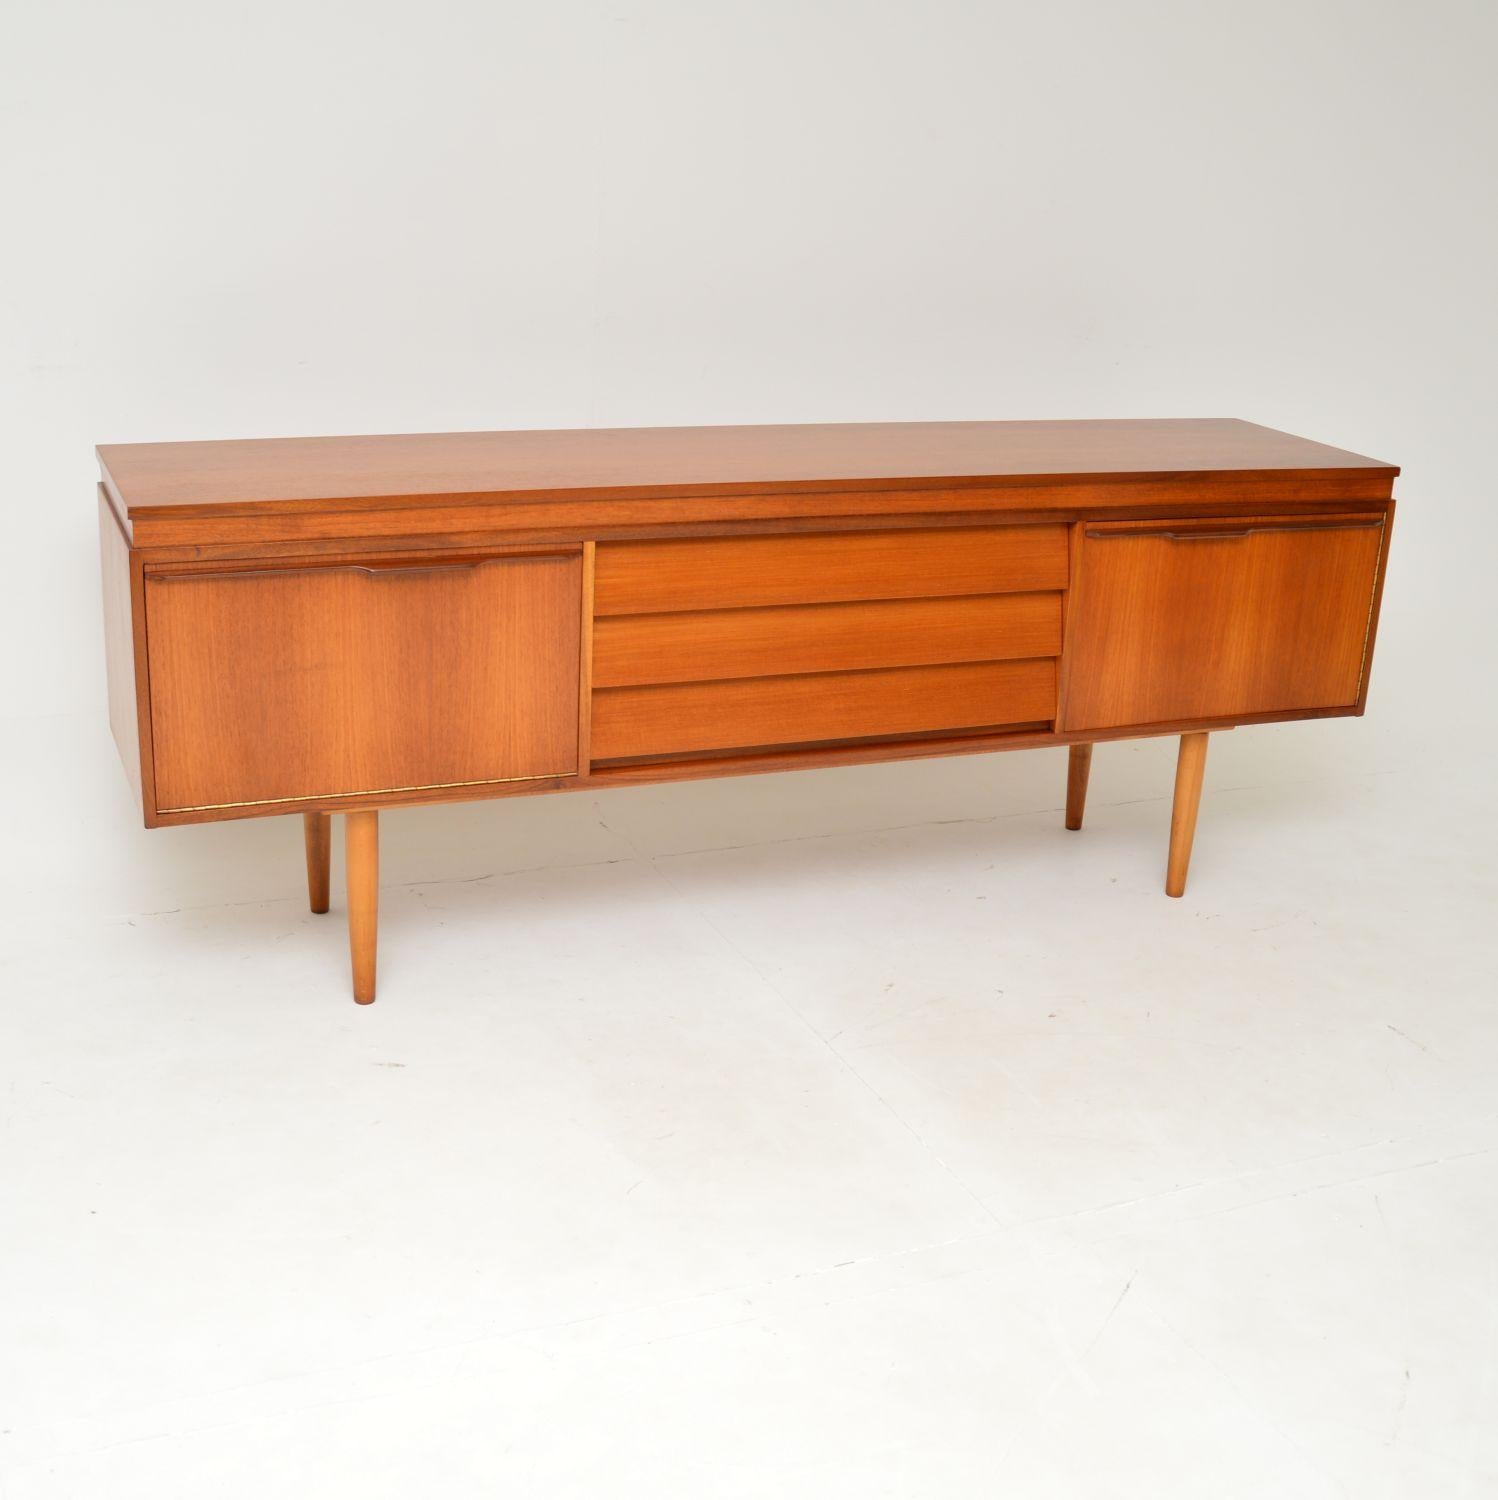 A sleek and very stylish vintage teak sideboard. This was made in England, it dates from the 1960’s.

This model is of superb quality, with two doors either side of three slanted drawers. The doors have beautifully sculpted lipped handles, the left